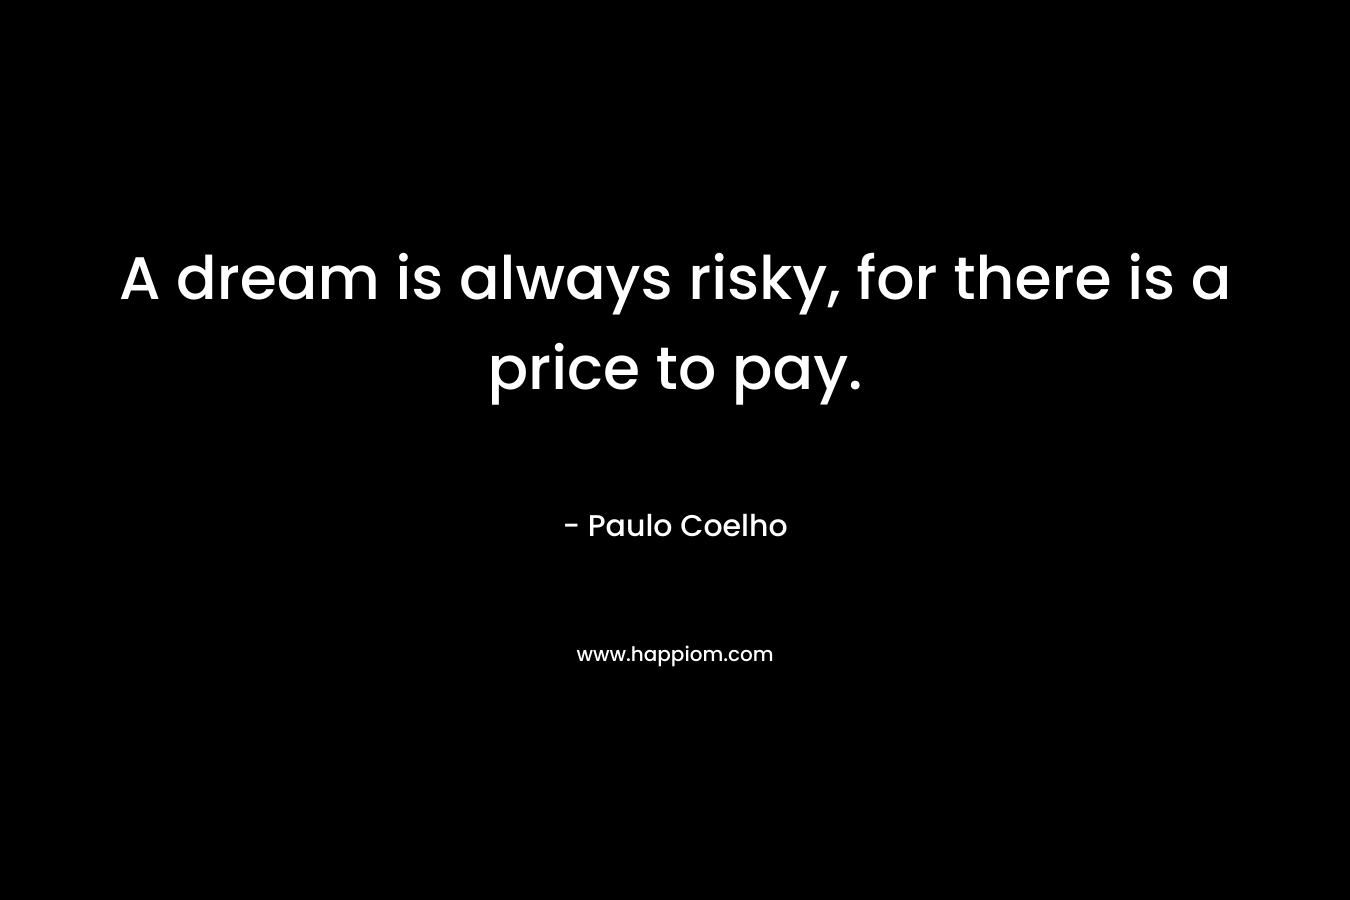 A dream is always risky, for there is a price to pay. – Paulo Coelho